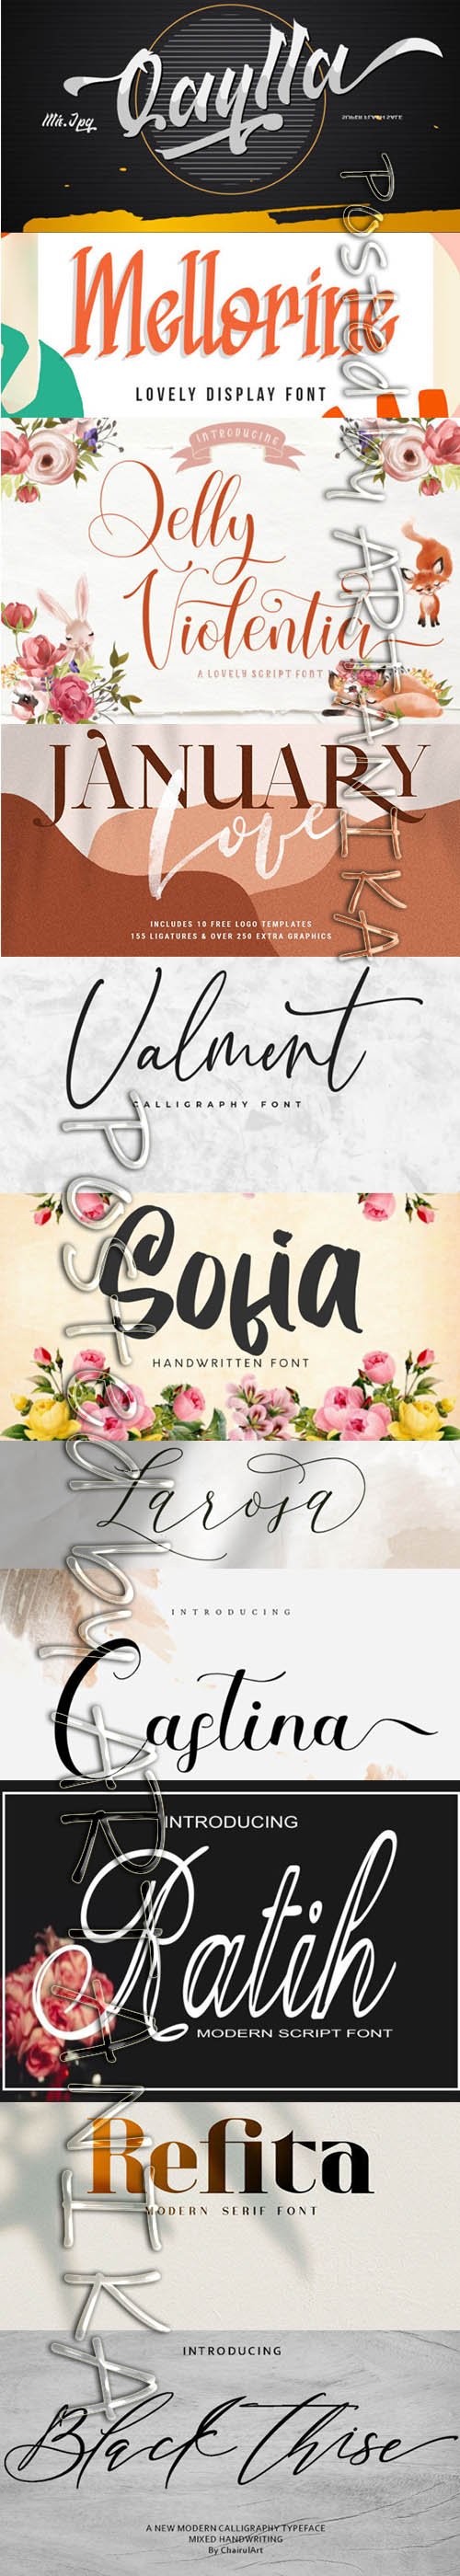 Collection of 11 Creative Fresh Fonts 2020 Vol 6